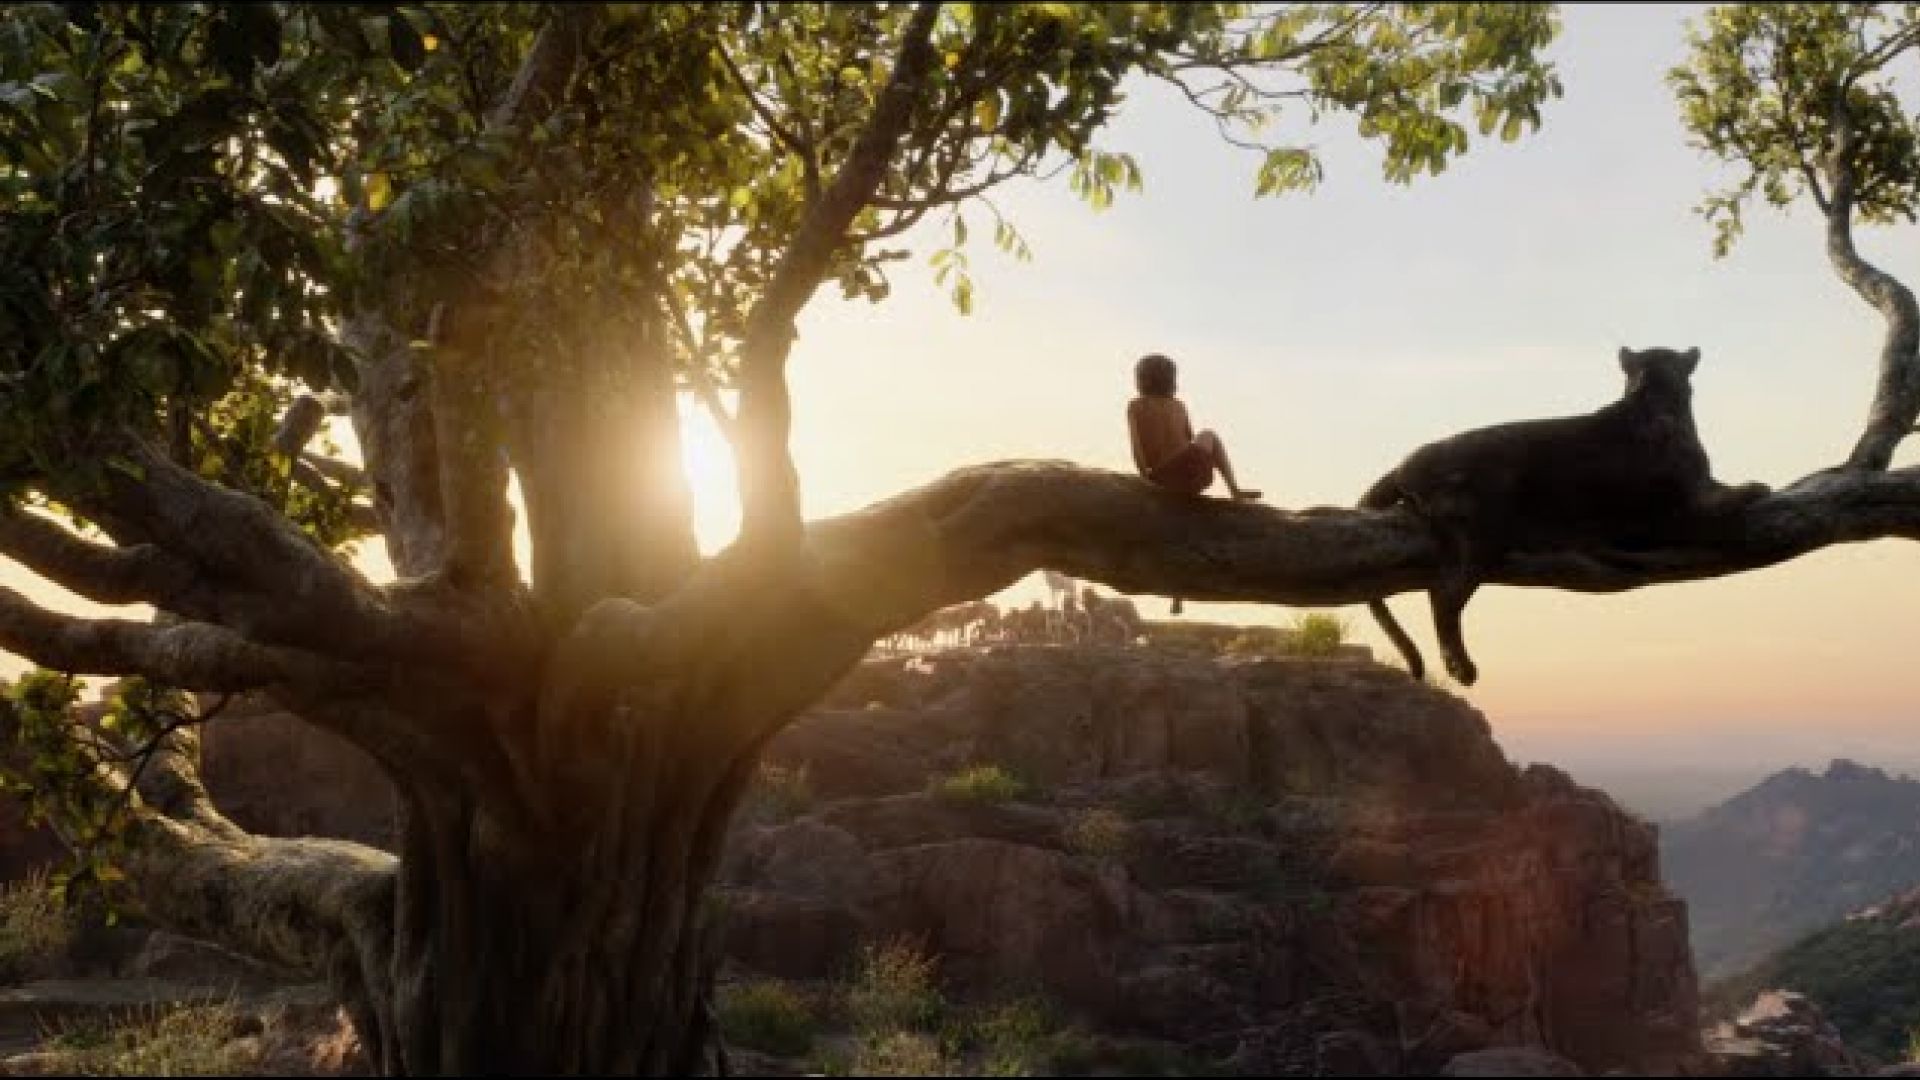 Fascinating look at the Making of The Jungle Book